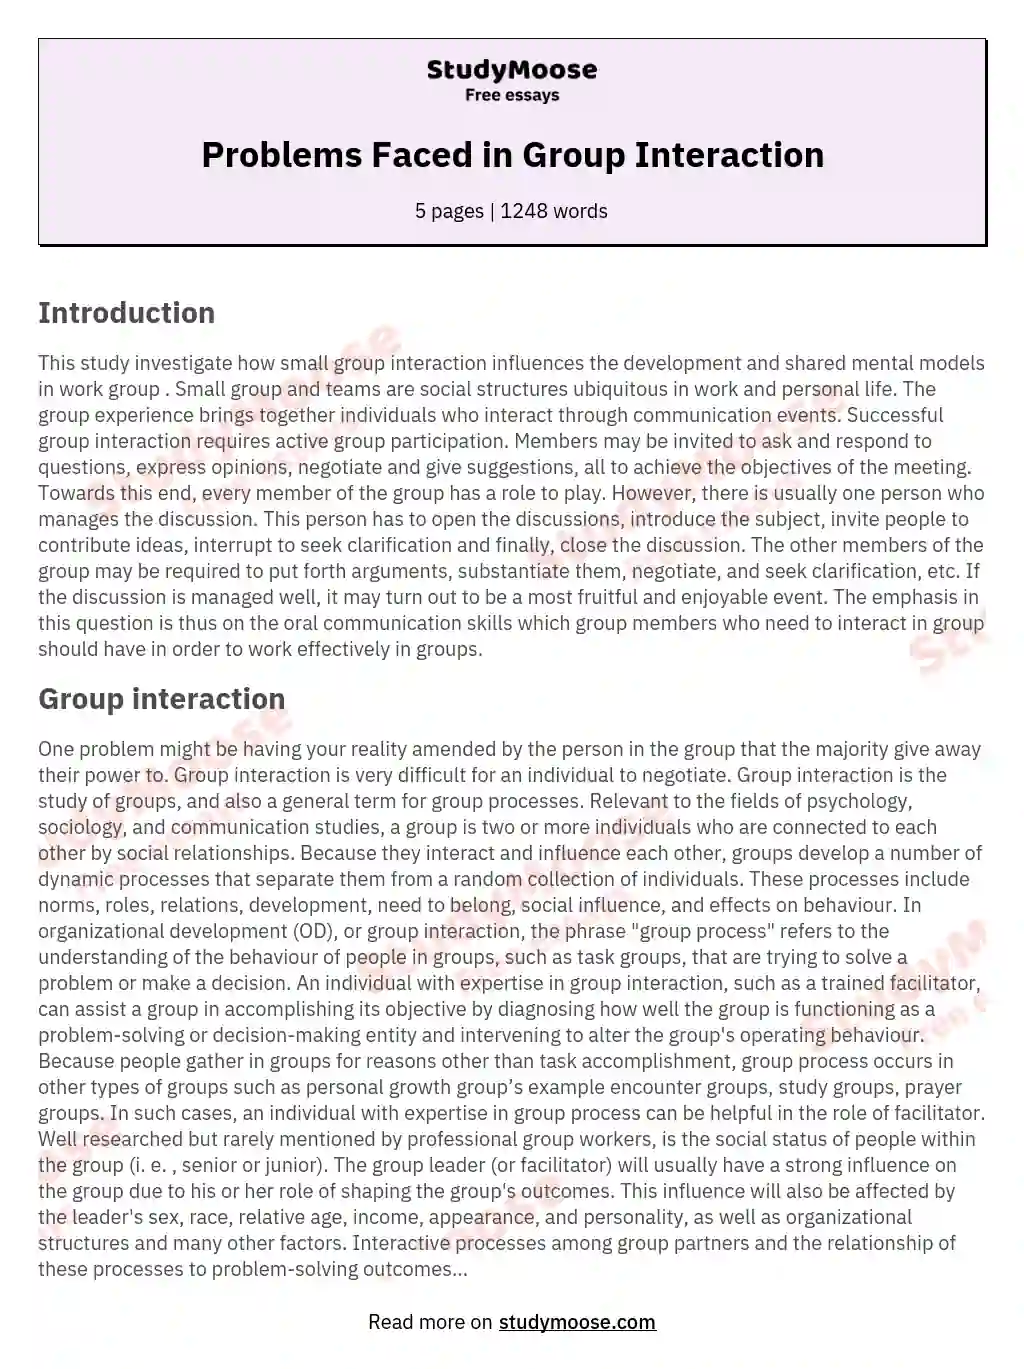 Problems Faced in Group Interaction essay